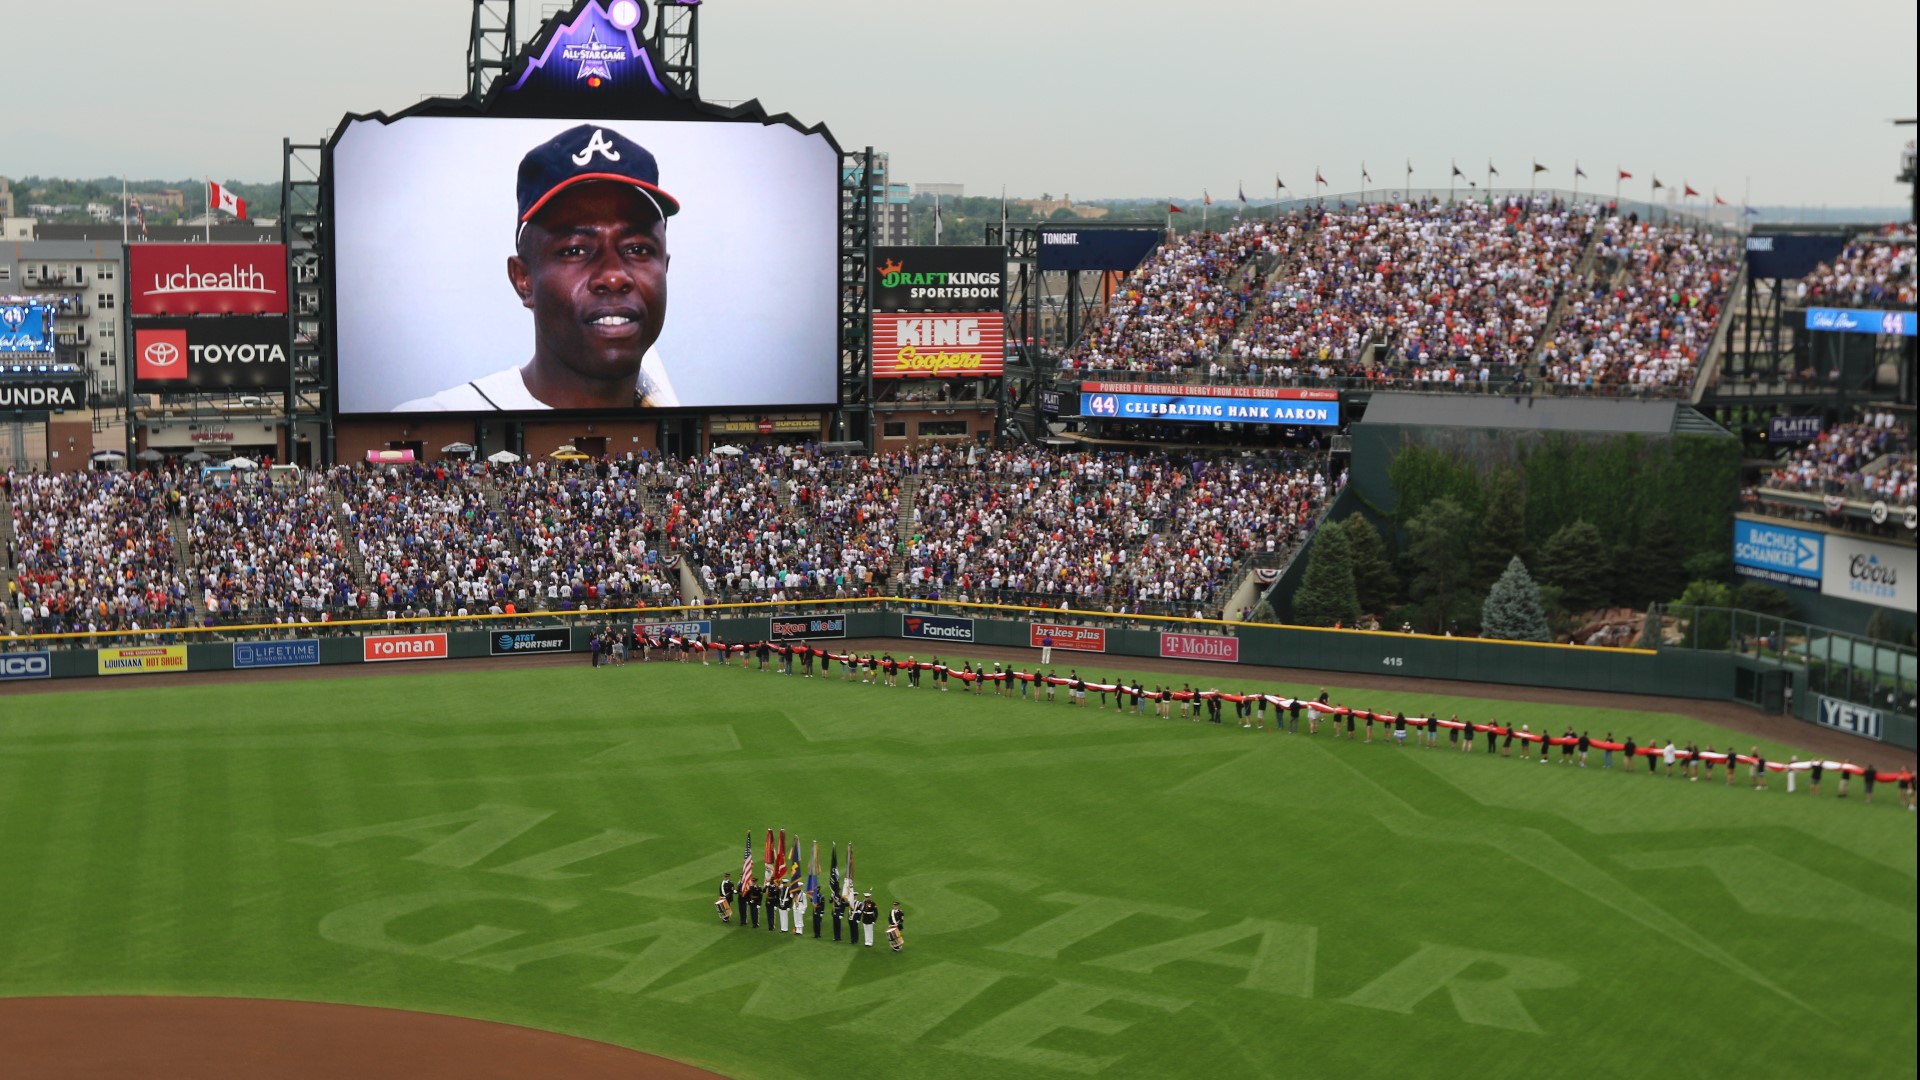 2021 MLB All-Star Game In Denver: Live Updates, Score, Photos And More